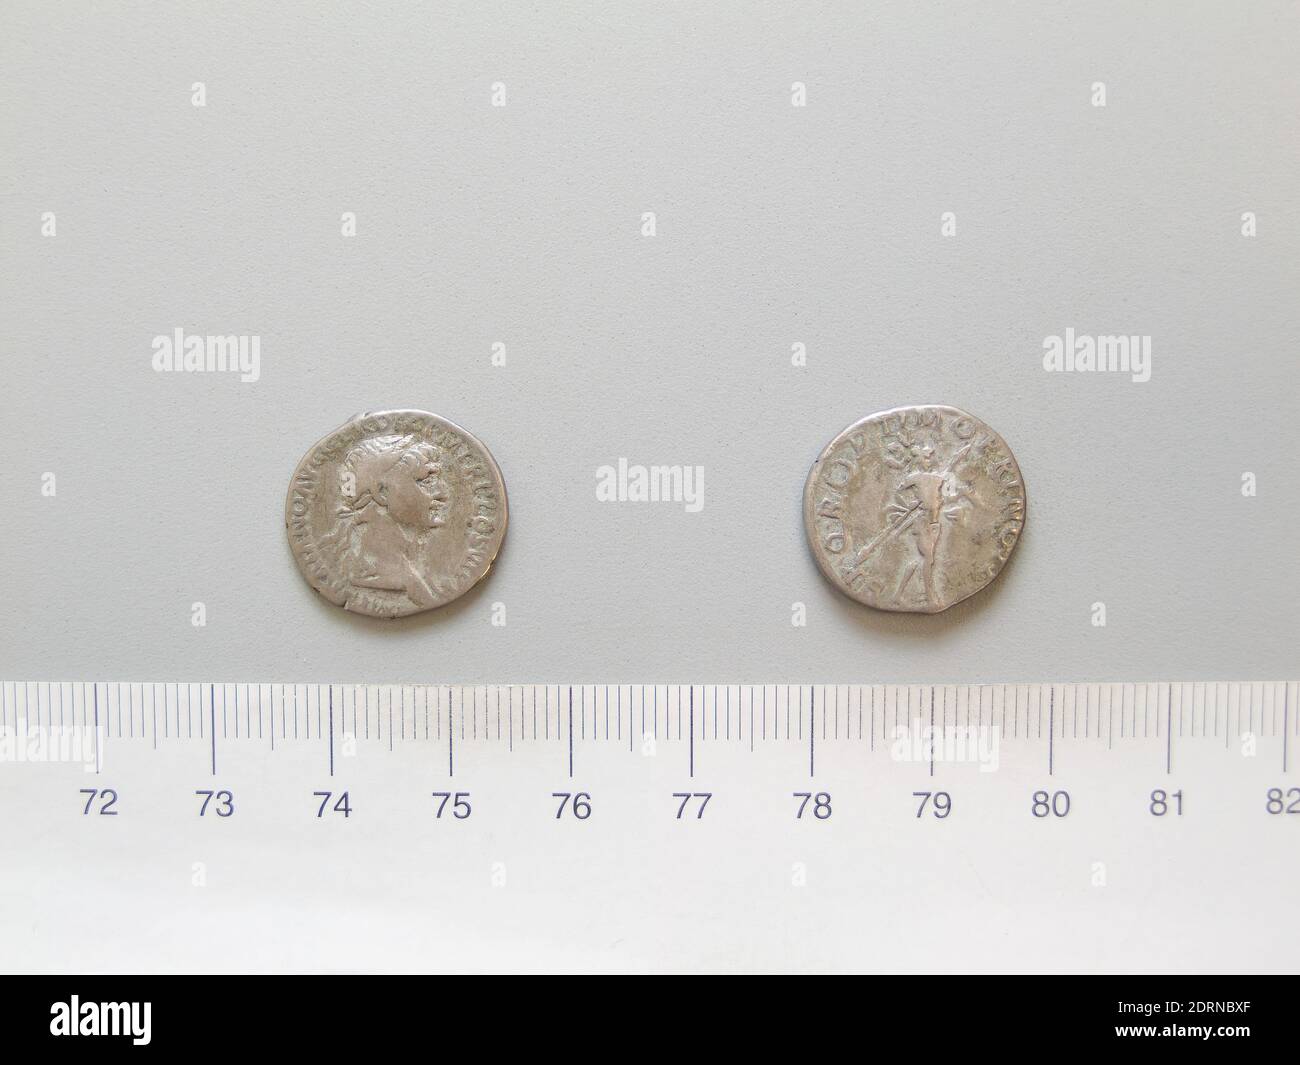 Ruler: Trajan, Emperor of Rome, A.D. 53–117, ruled 98–117, Mint: Rome, Denarius of Trajan, Emperor of Rome from Rome, 112–17, Silver, 2.93 g, 7:00, 18.7 mm, Made in Rome, Roman, 2nd century, Numismatics Stock Photo